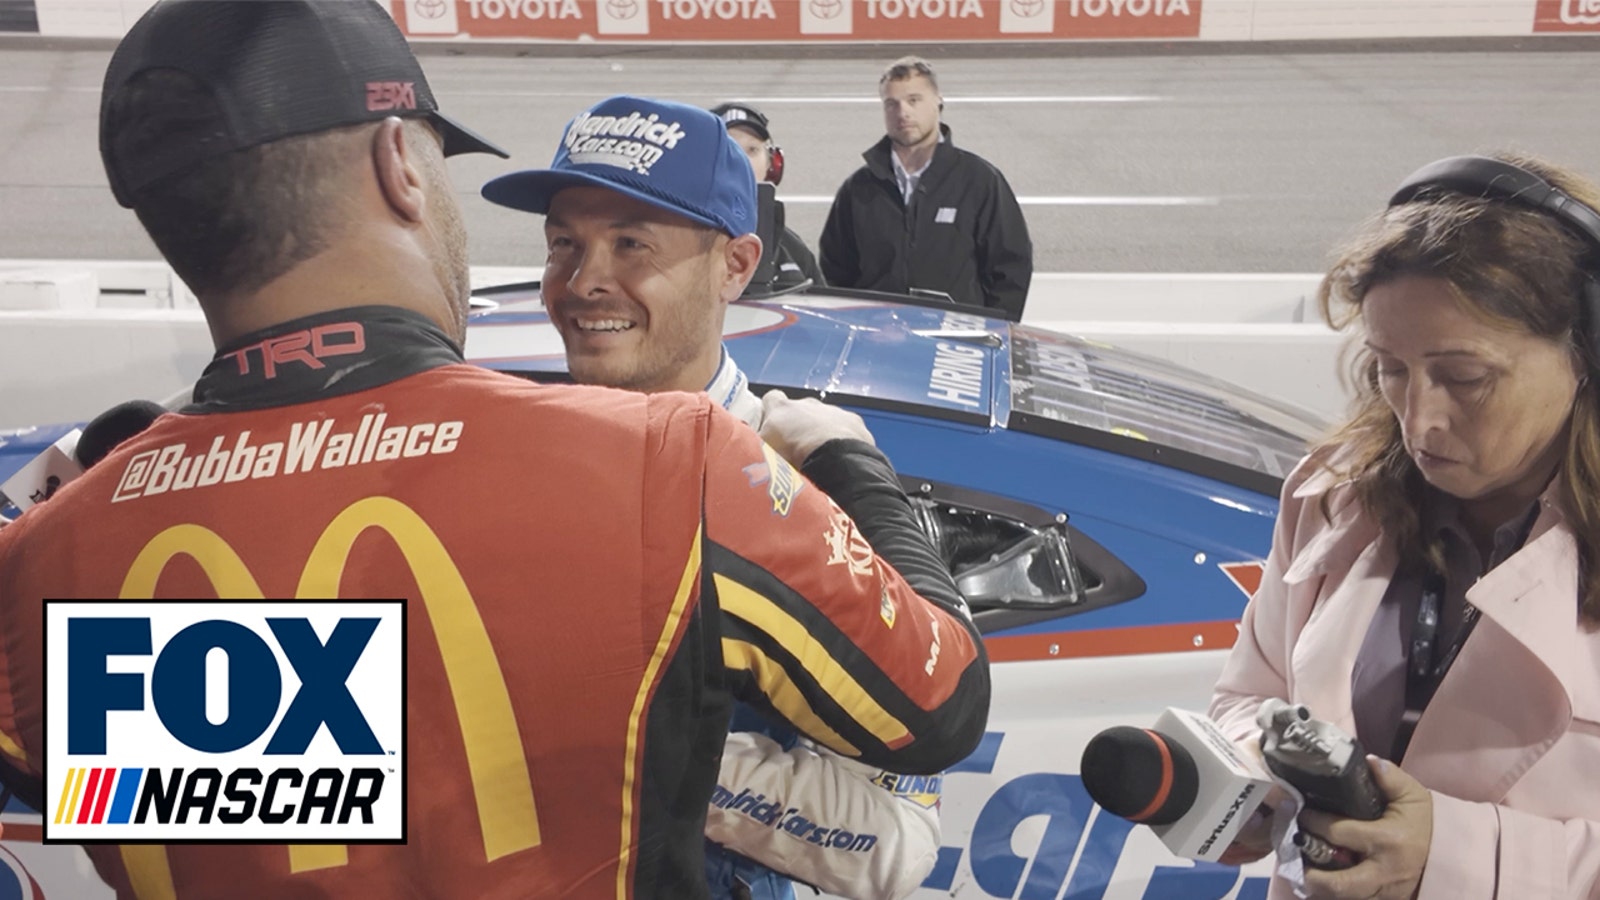 Kyle Larson and Bubba Wallace have a quick chat postrace, but Larson didn't feel anything was intentional